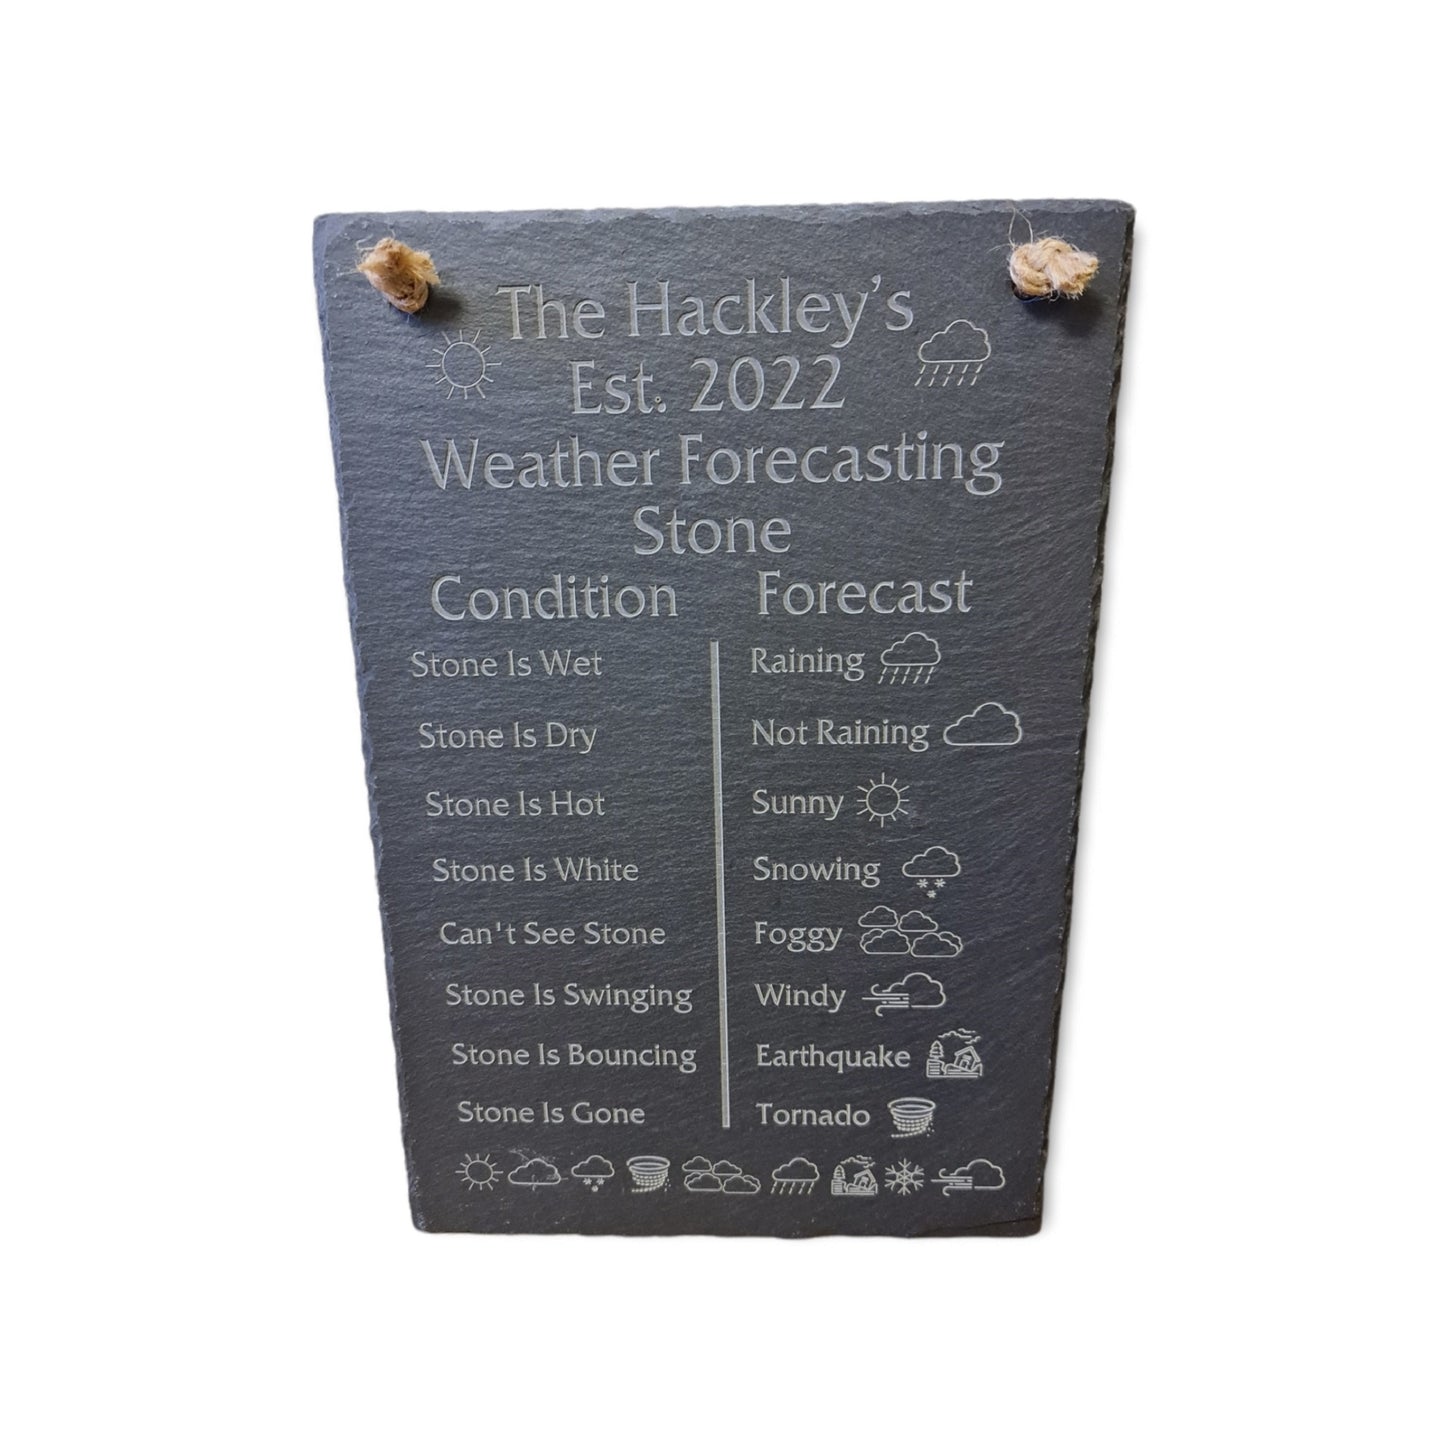 Personalised Engraved Natural Slate Weather Forecasting Stone